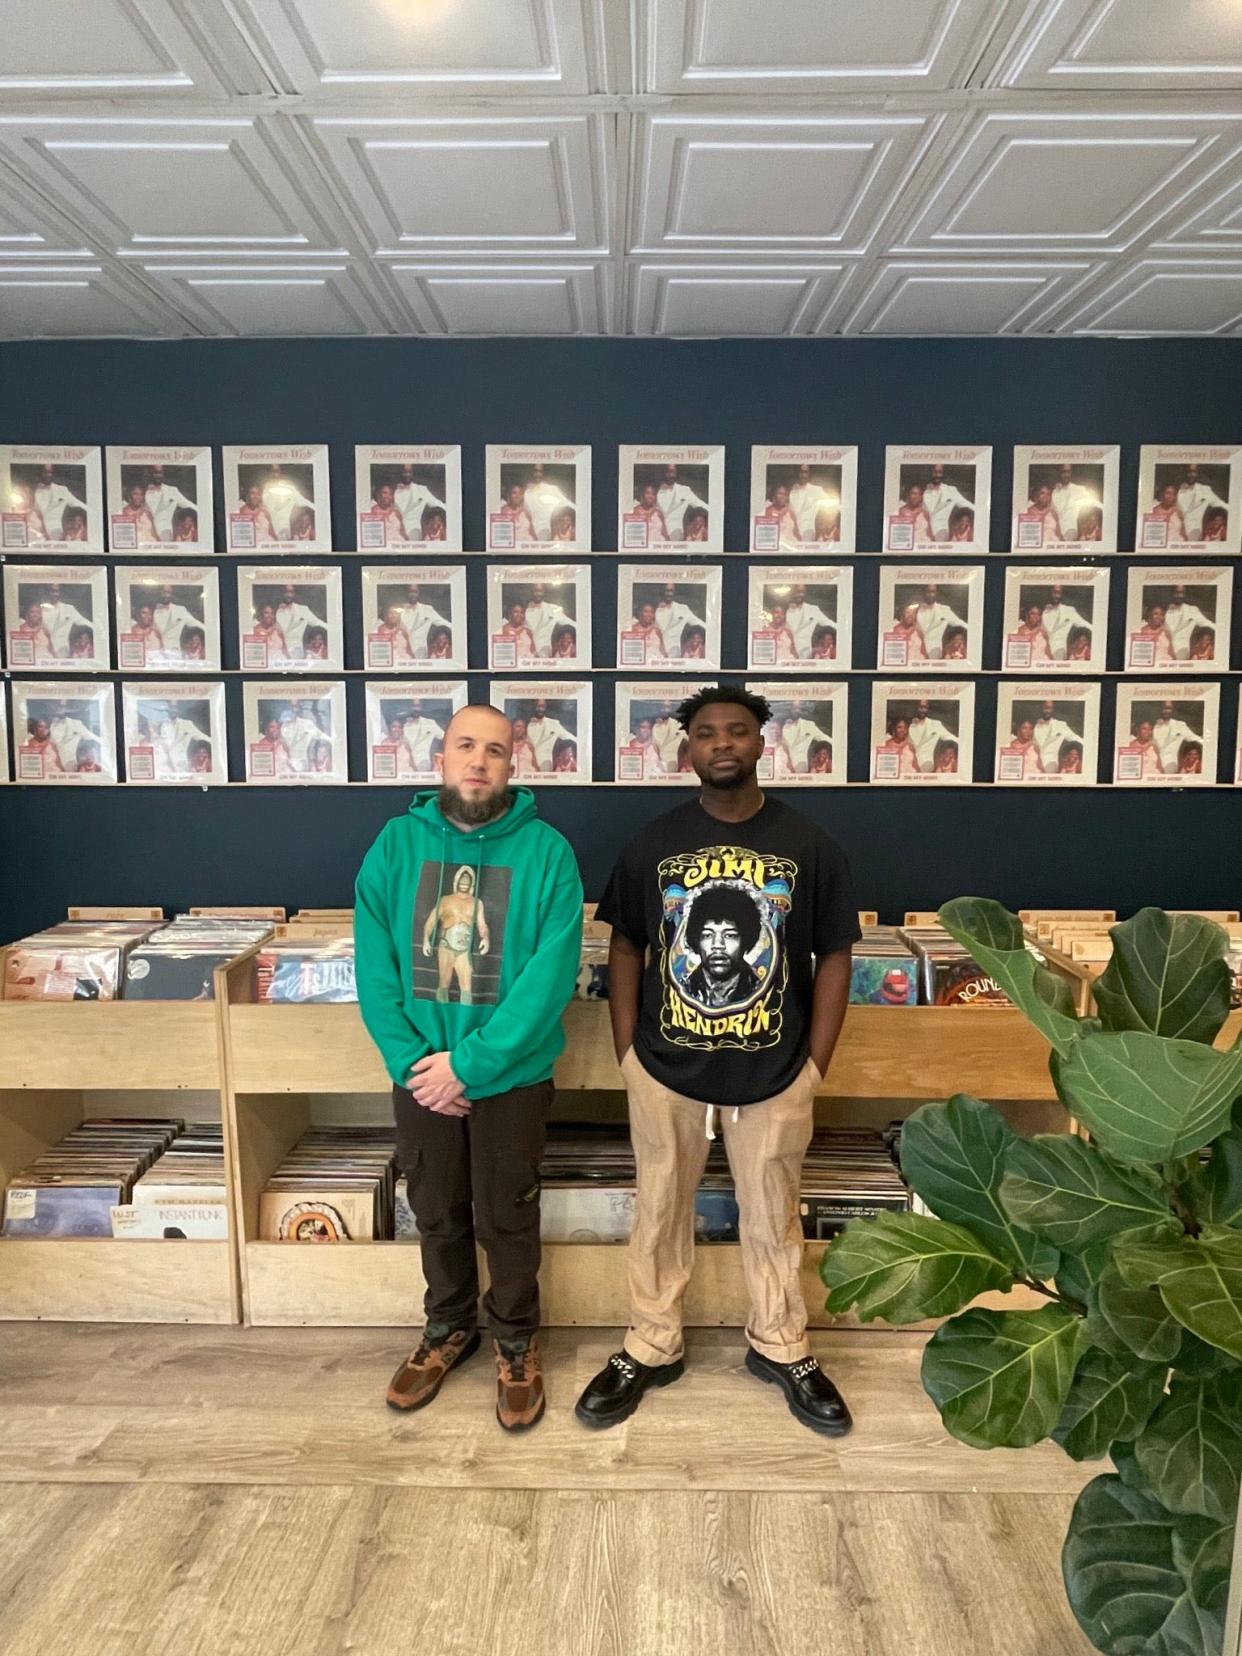 Music producers Derek "KAS" Kastal of Worcester and Marcus "Motif Alumni" Rucker of New York pose in front of copies of "On My Mind," a gospel album by Tomorrow's Wish re-released in 2023 on Kastal and Rucker's Holy Grail Records label.